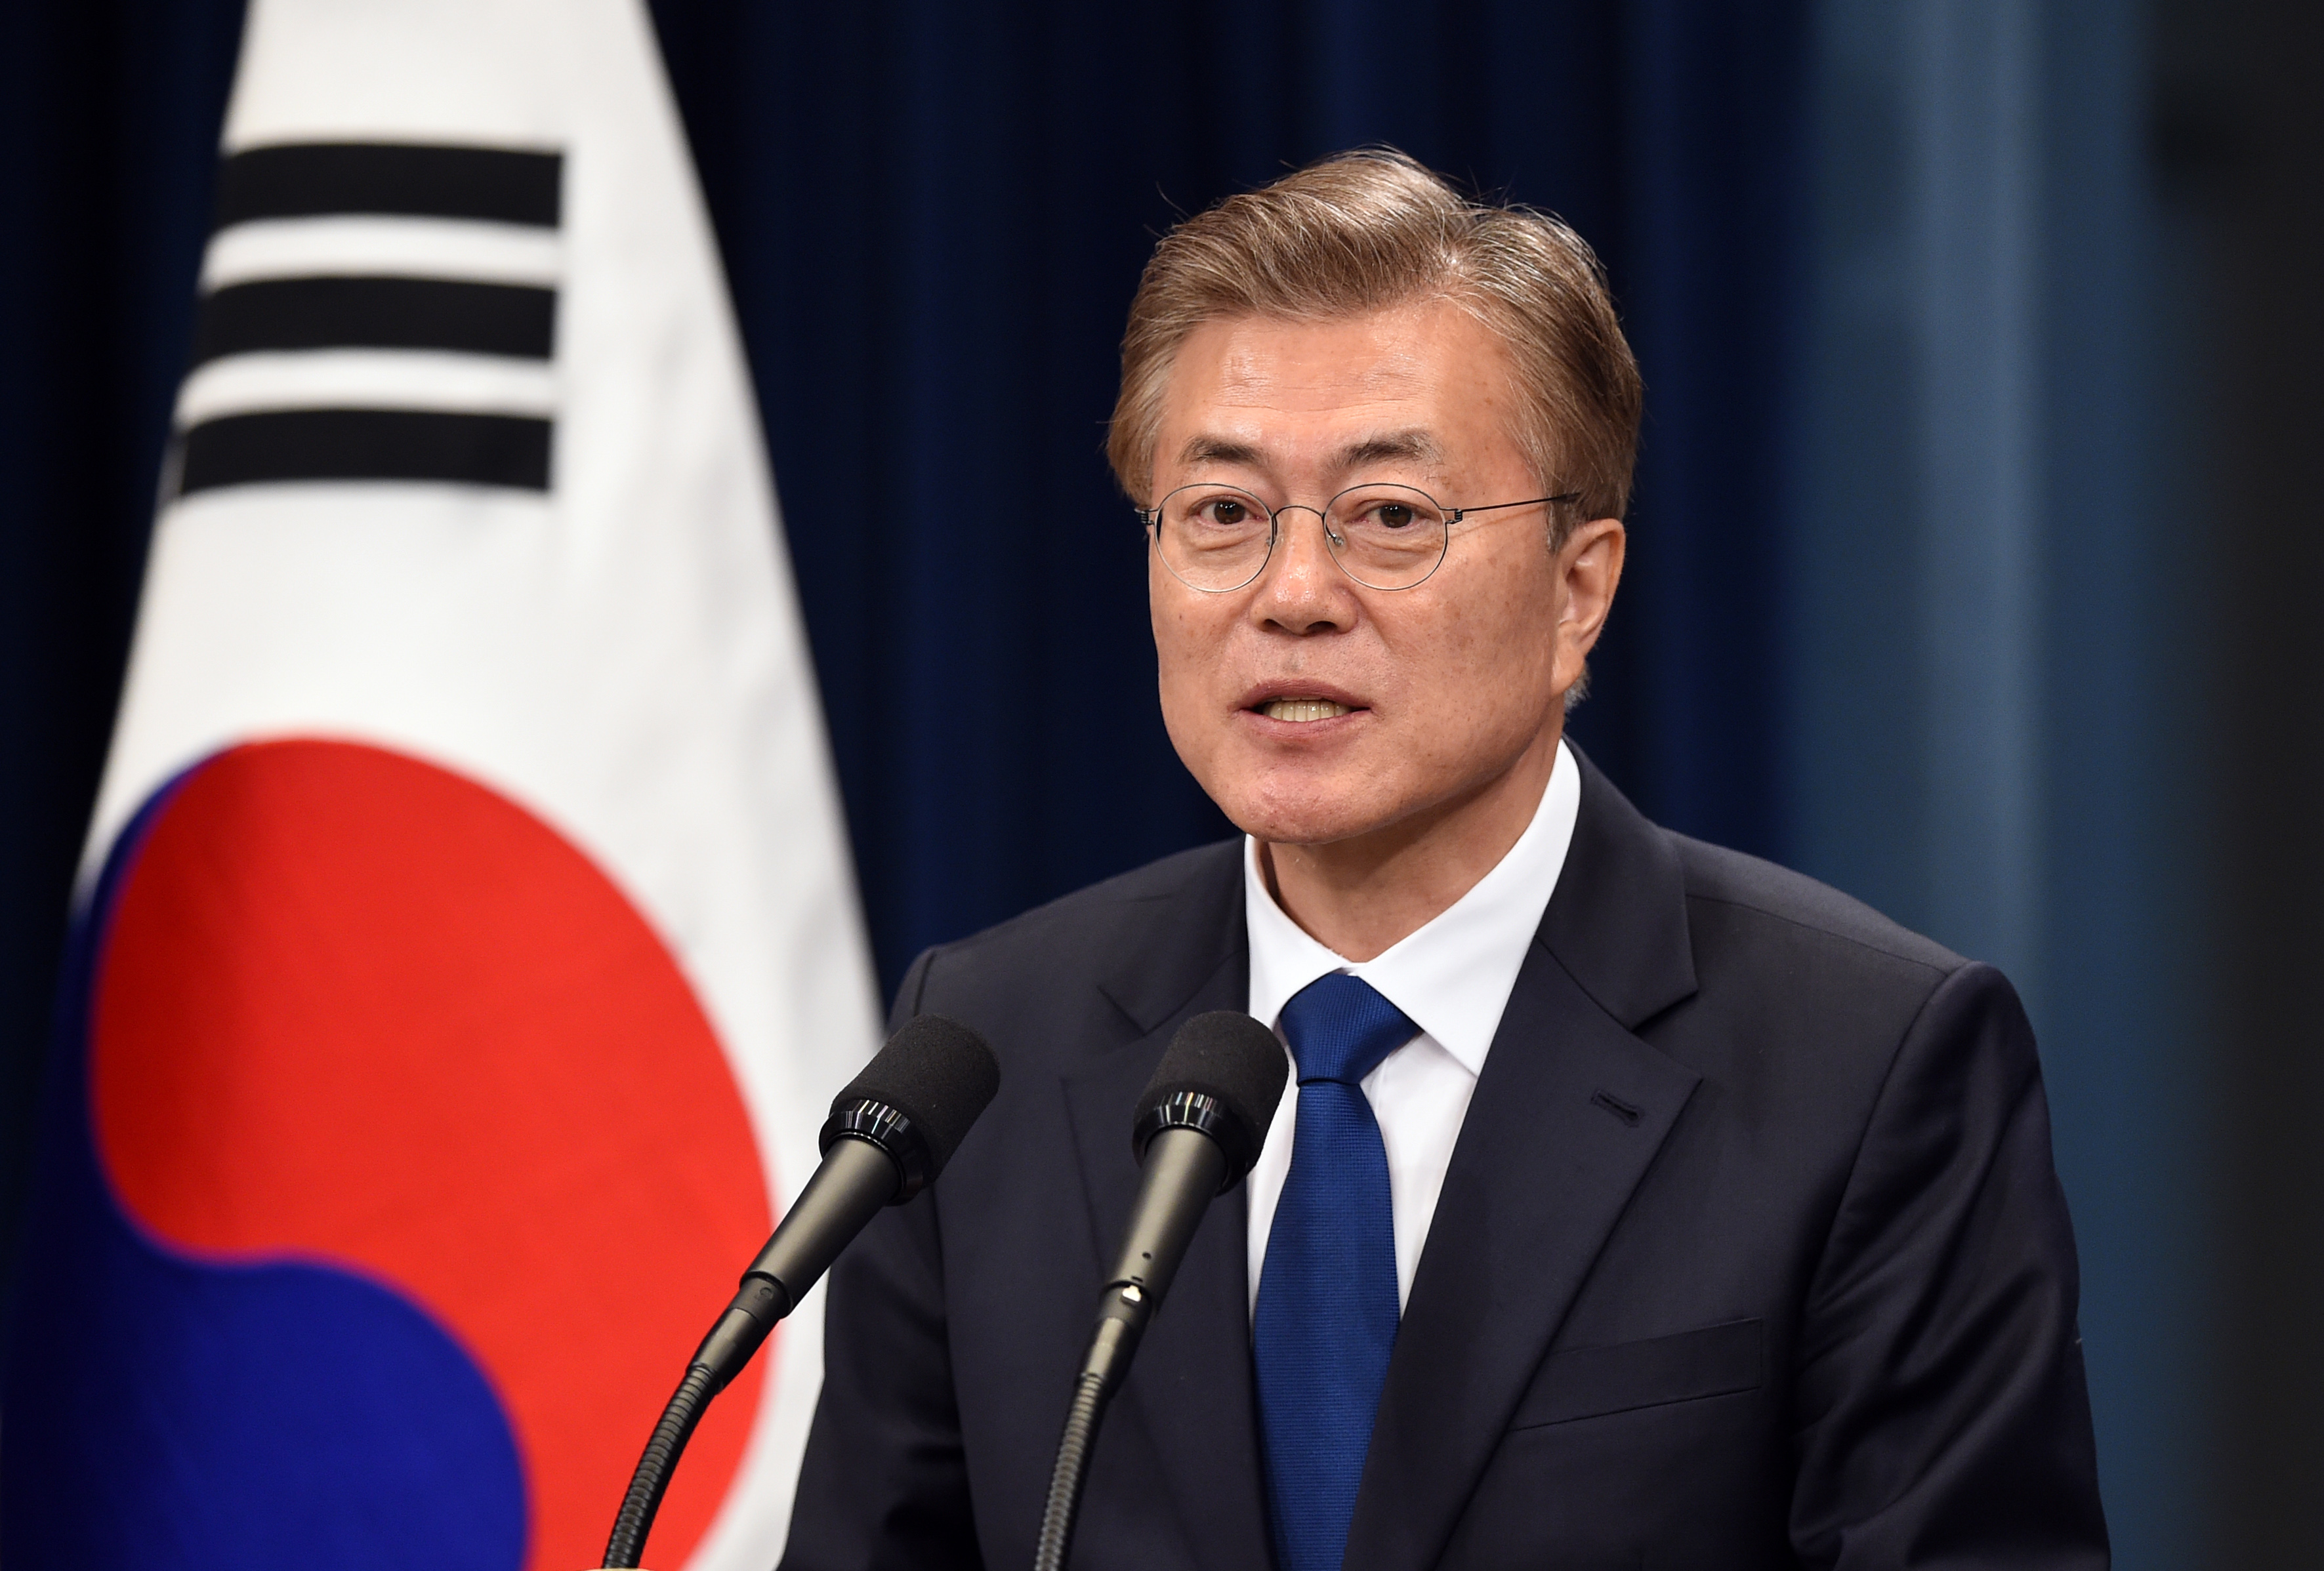 South Korea's new President Moon Jae-In during a press conference at the presidential Blue House in Seoul on May 10, 2017. (Jung Yeon-Je—Getty Images)